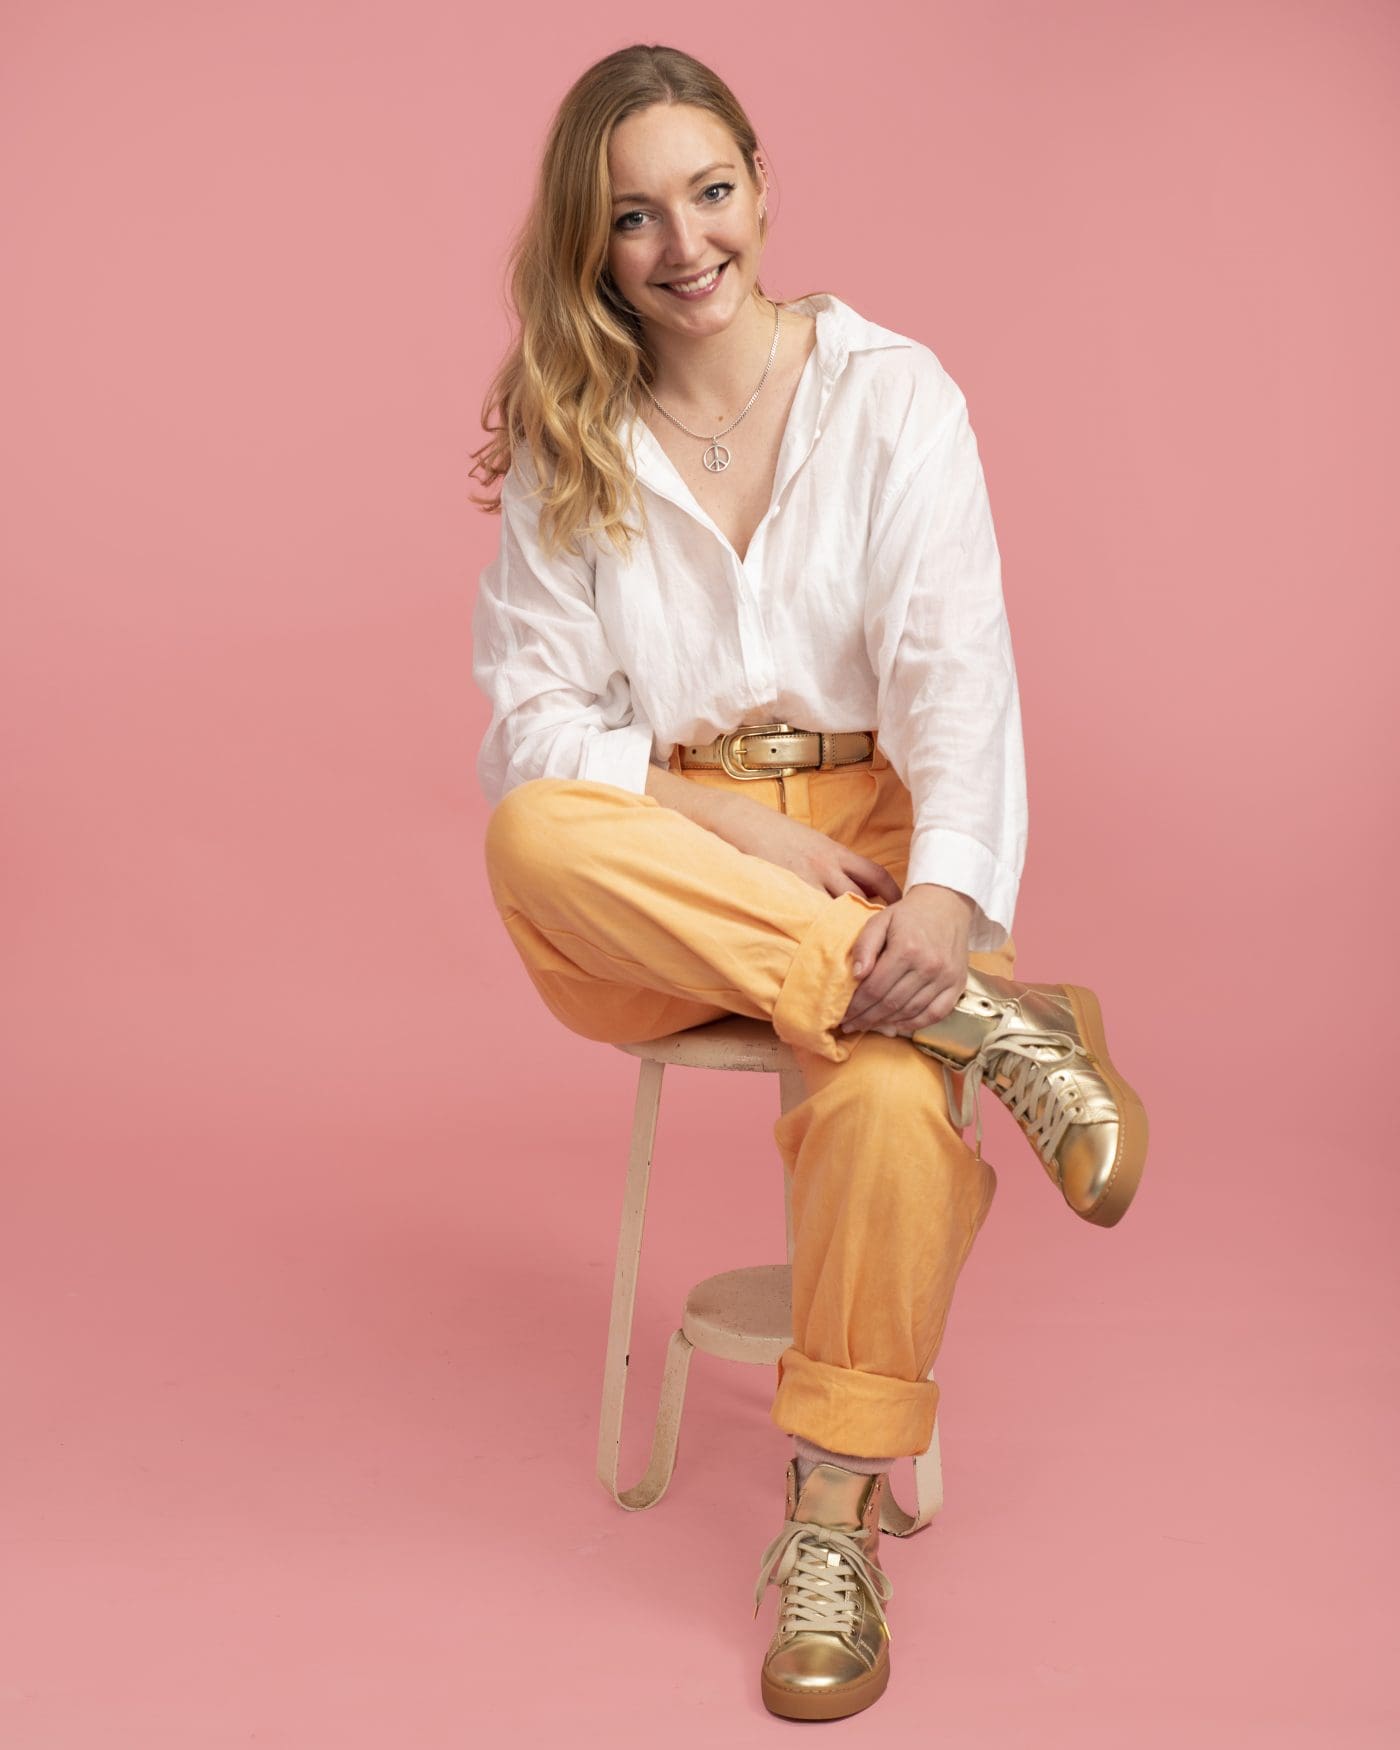 Melbourne business owner sits in a relaxed poses wearing a white shirt and yellow pants. She smiles to camera for a personal branding portrait.